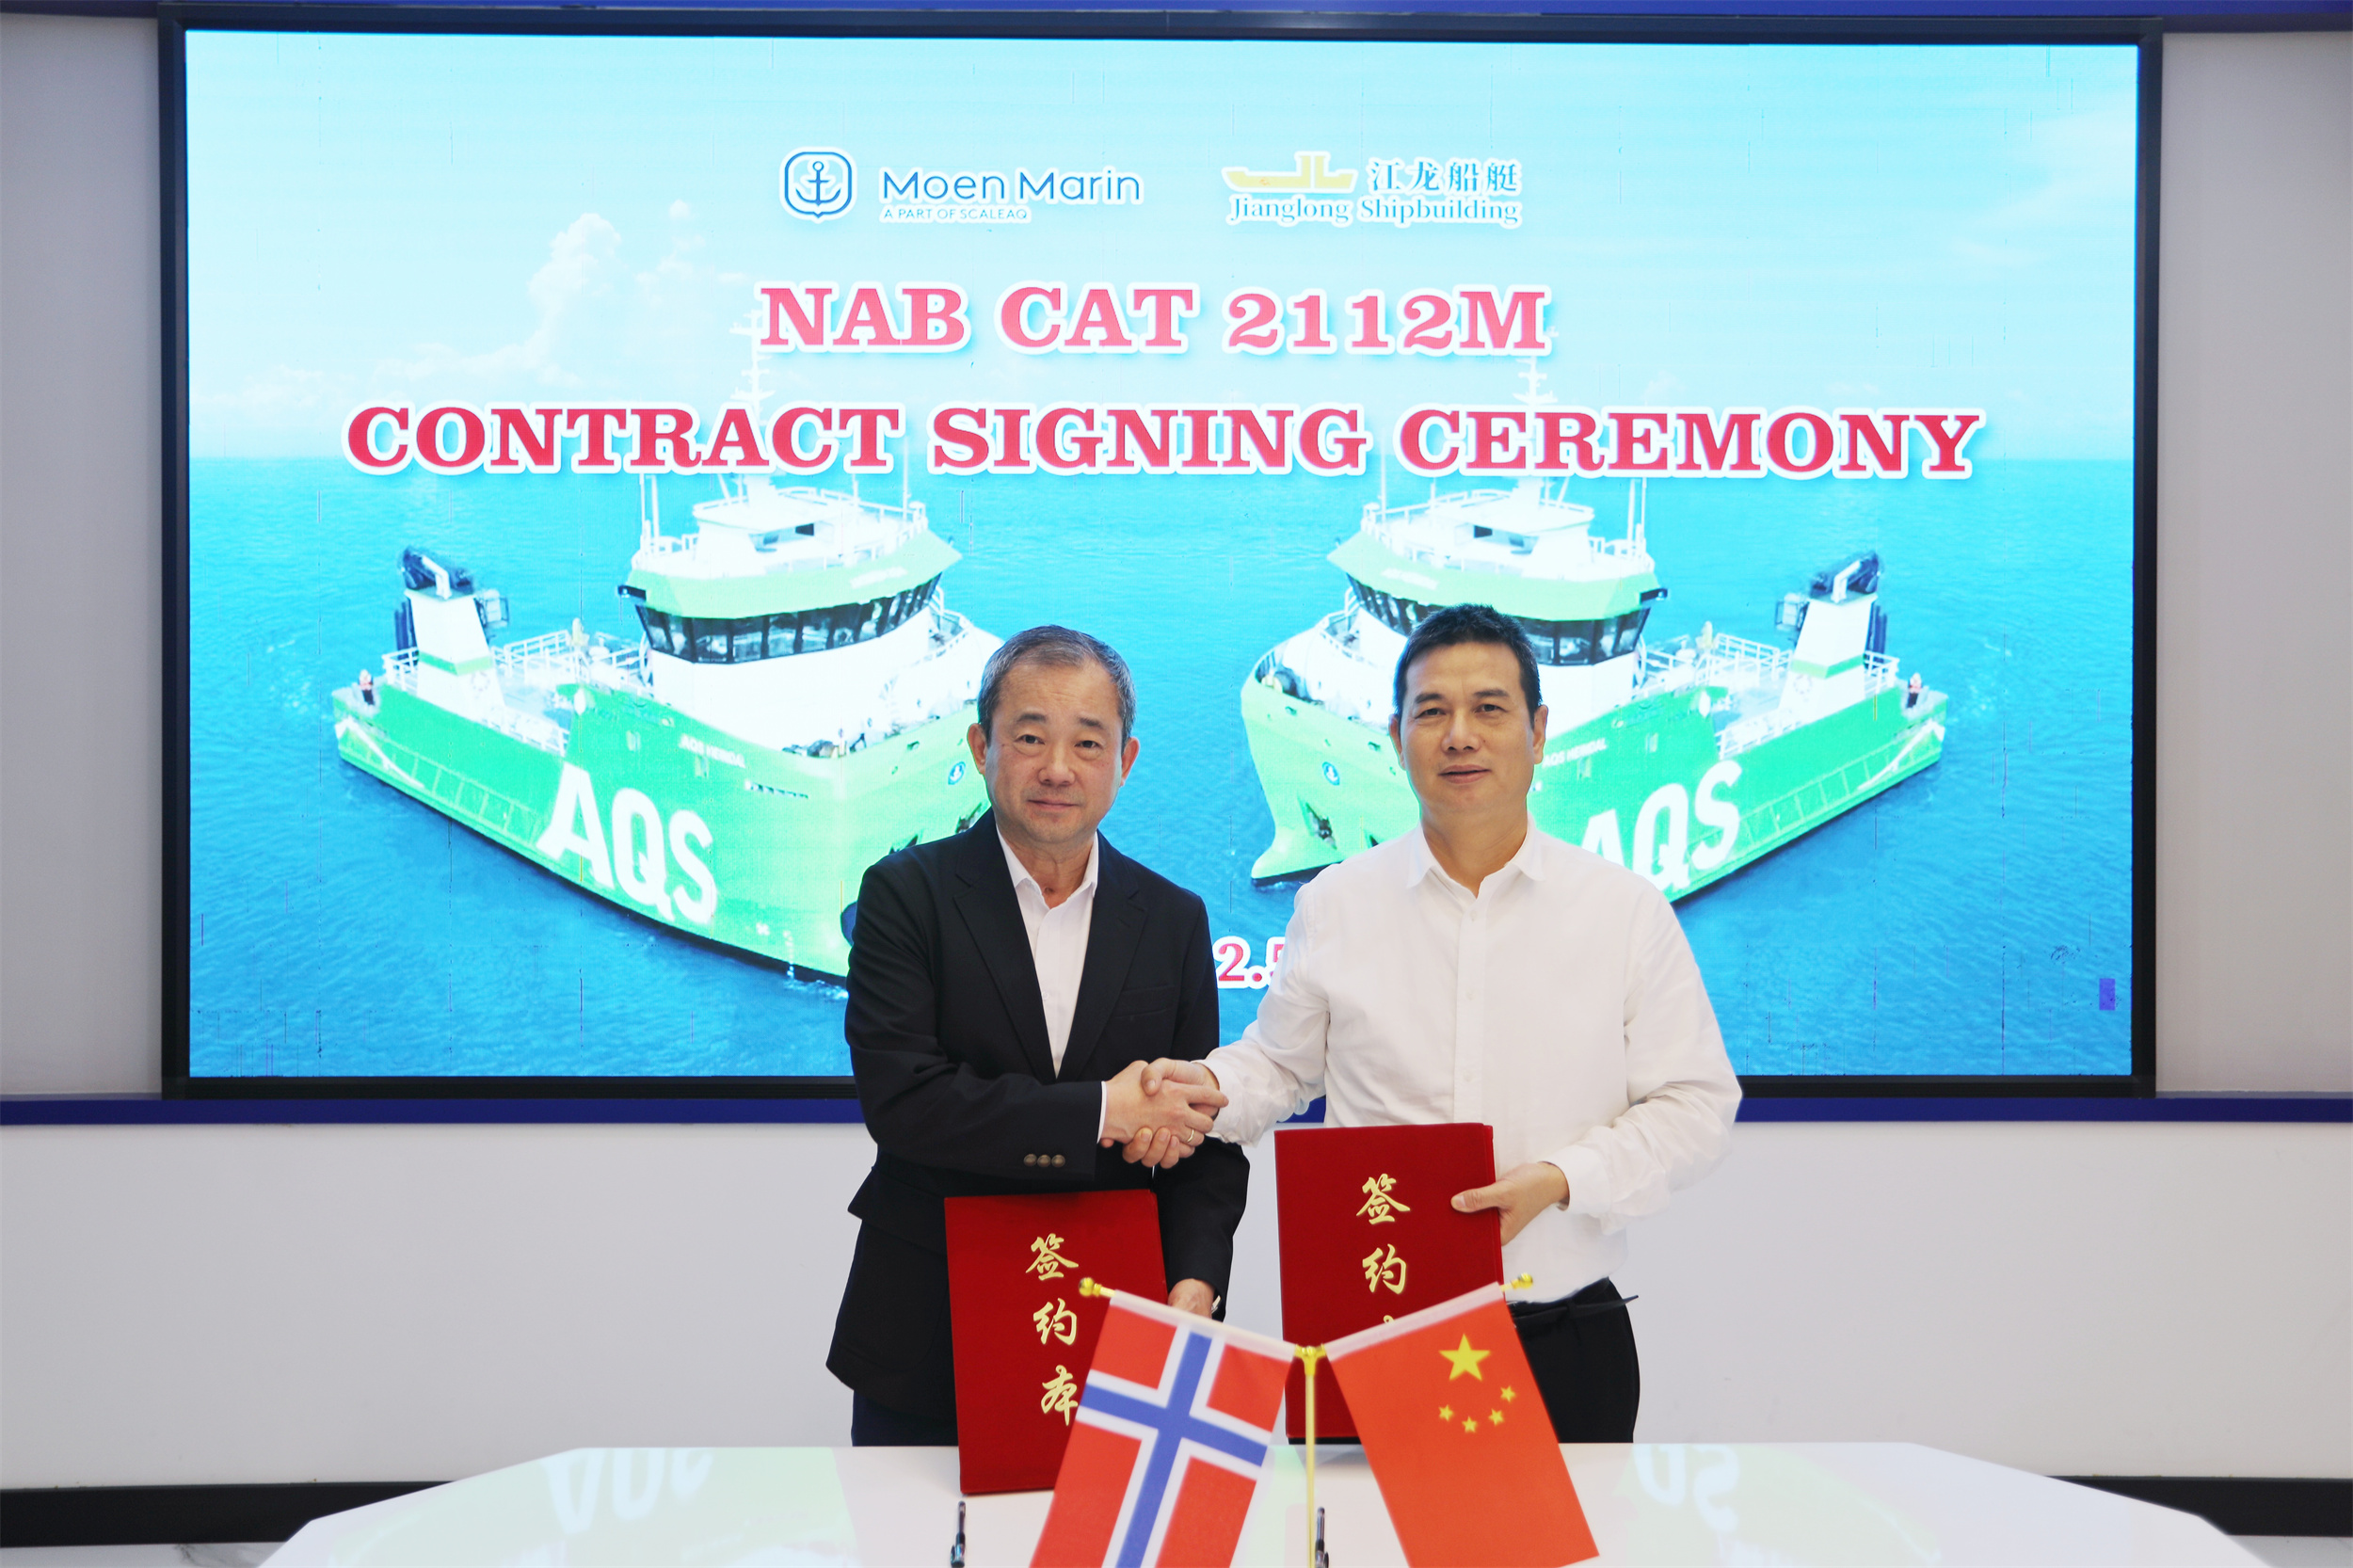 Jianglong Shipbuilding signed a contract with Moen Marin AS of Norway for two 21-meter aquaculture workboats